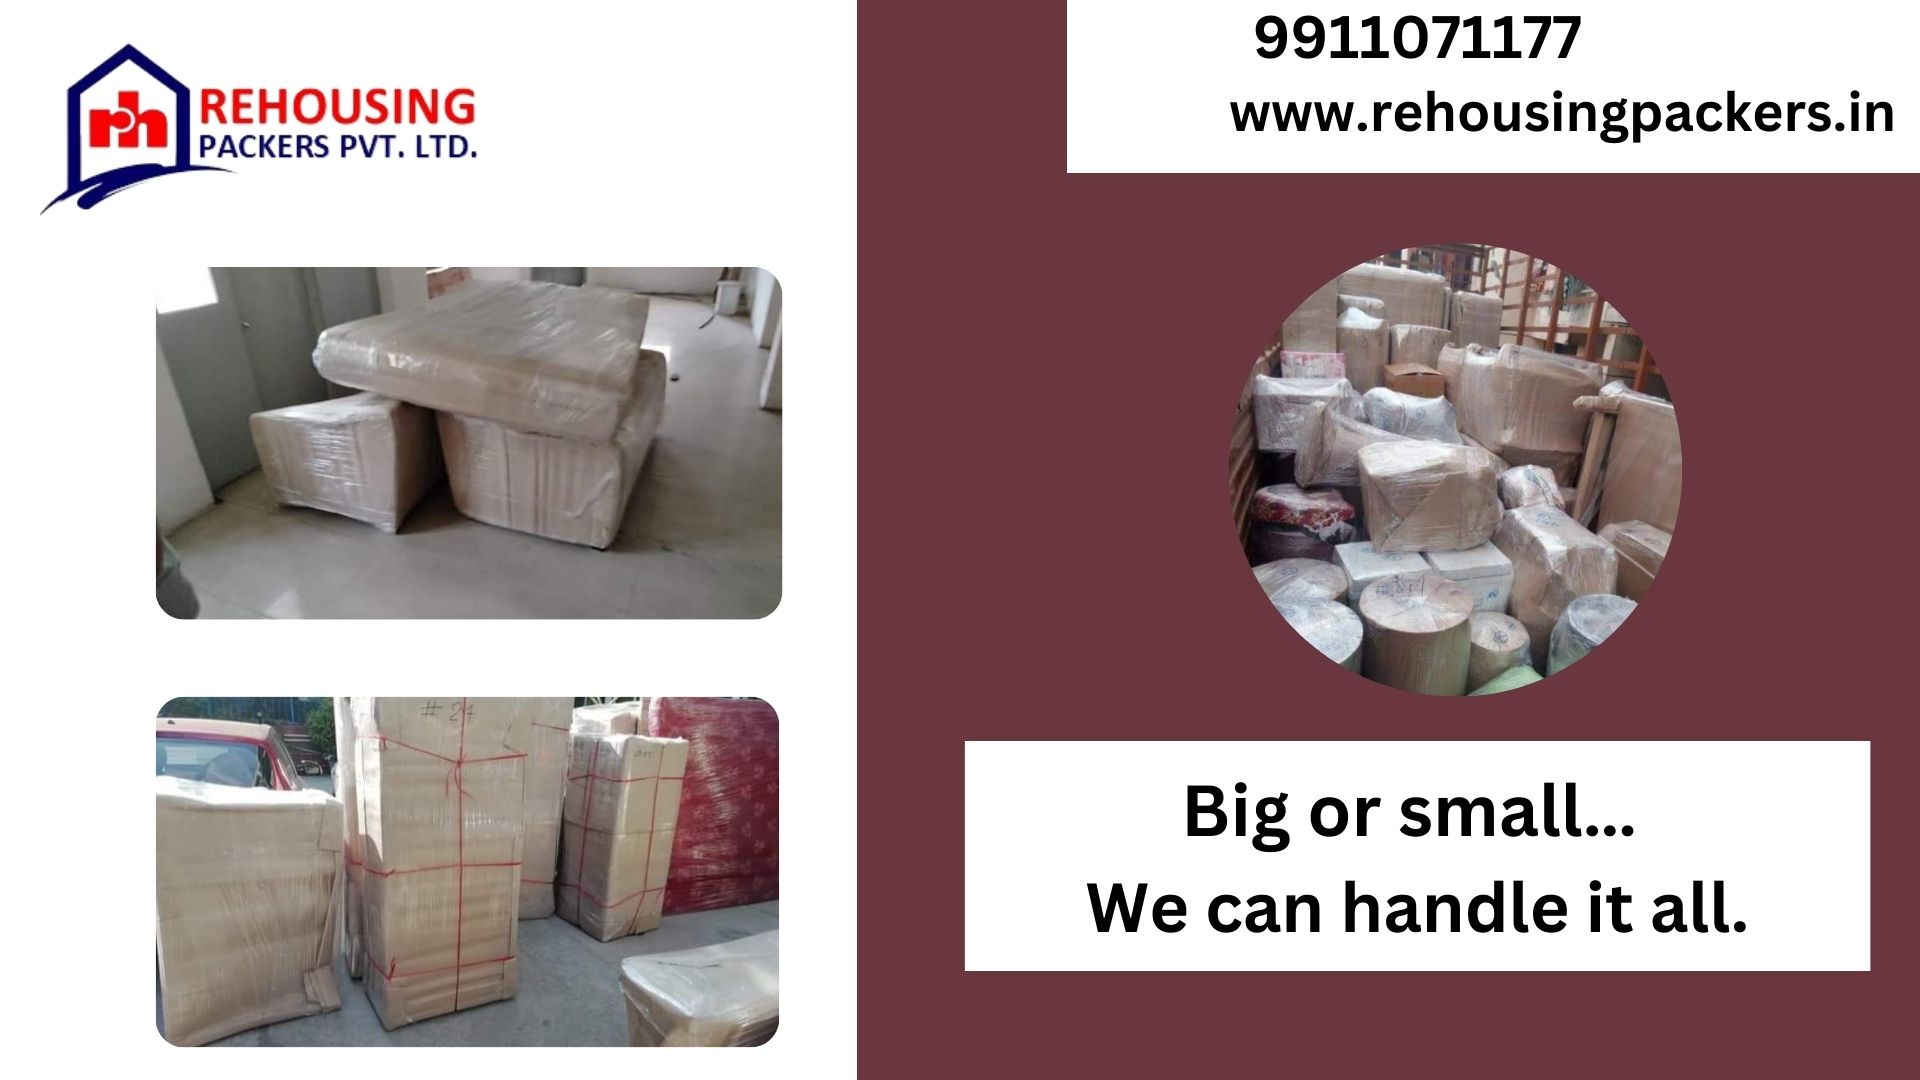 our packers and movers in Whitefield are given below